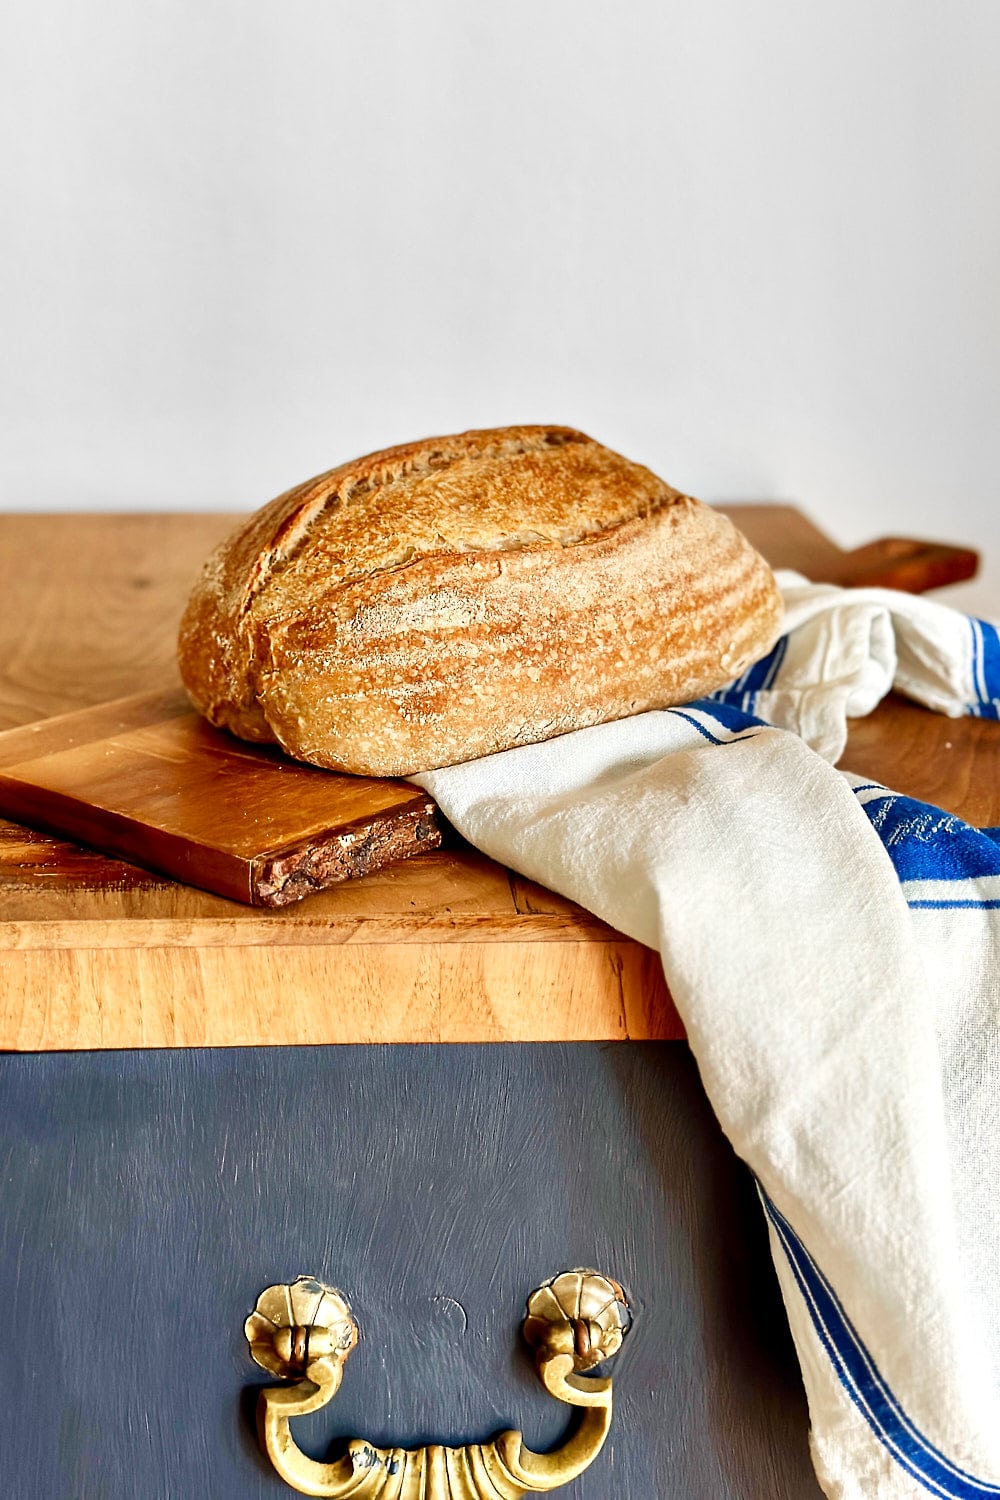 A crispy loaf of rosemary sourdough bread on a wooden board with a white linen towel next to it.